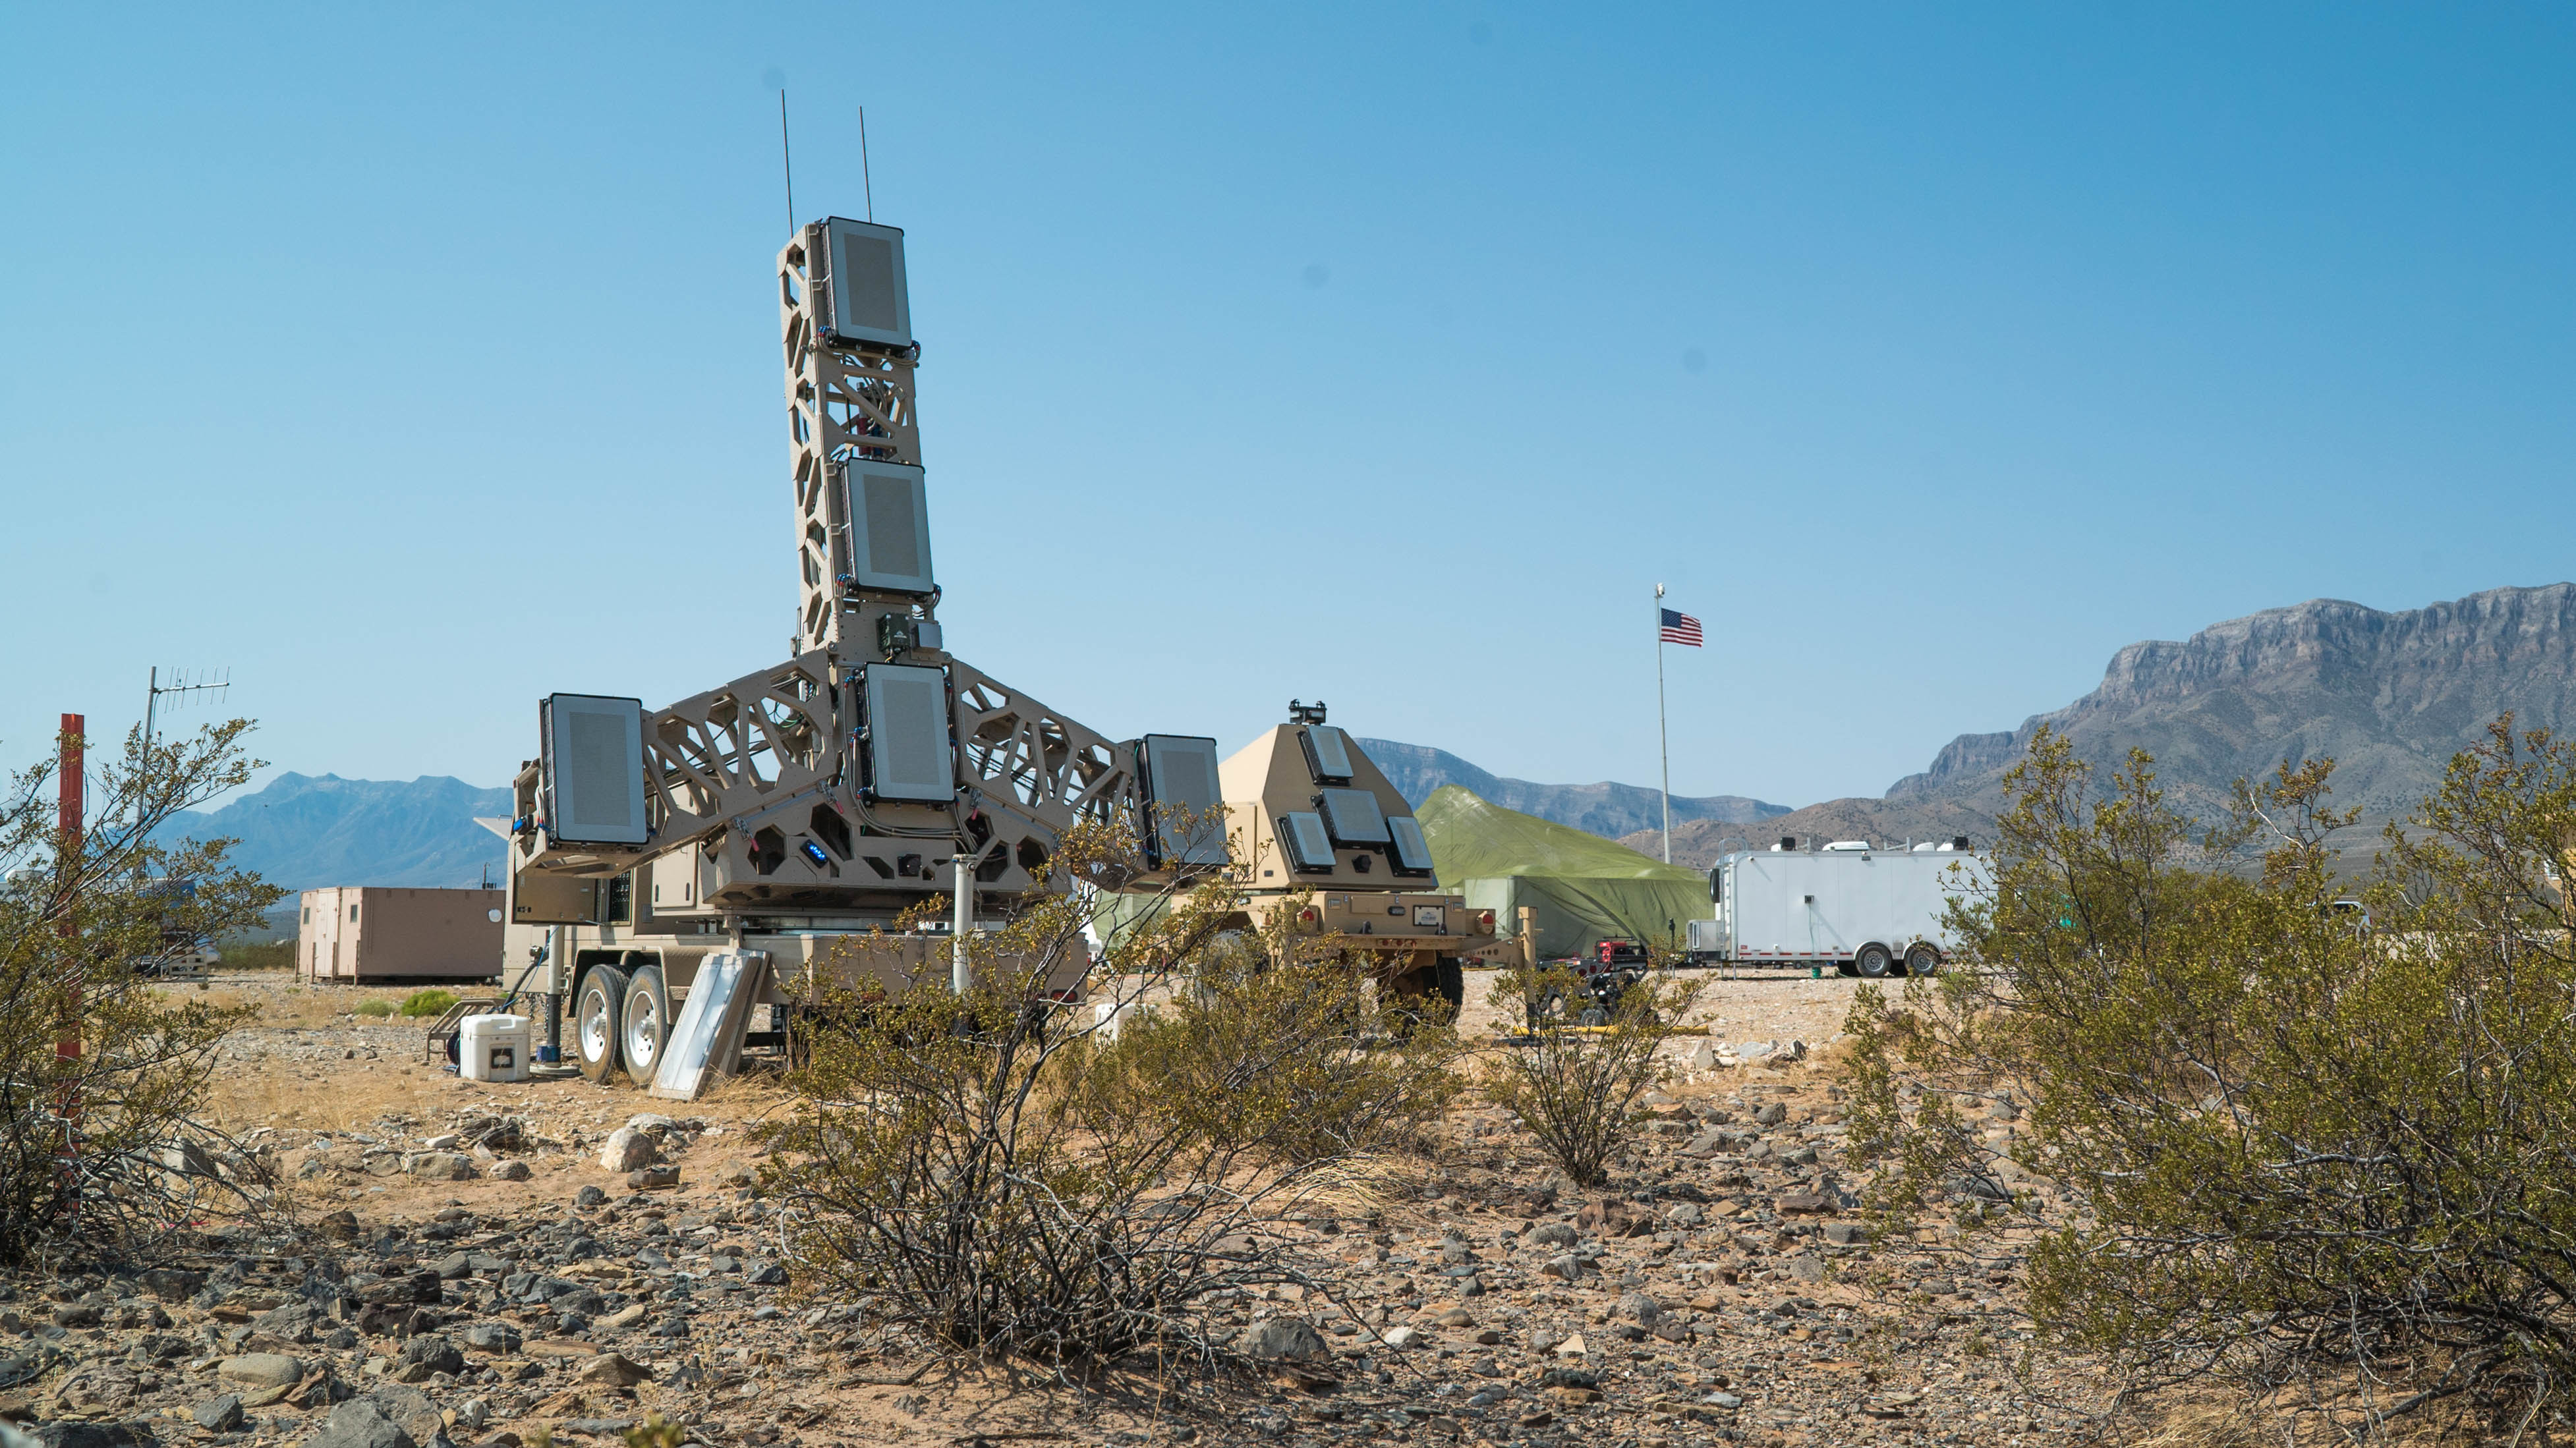 A-prototype-fire-control-radar-used-to-track-threats-and-pass-information-to-weapons-designed-to-take-down-the-target-is-being-tested-during-the-Advanced-Battle-Management-Systems-Onramp-2-at-White-Sands-Missile-Range-N.M.-in-August-1.jpeg